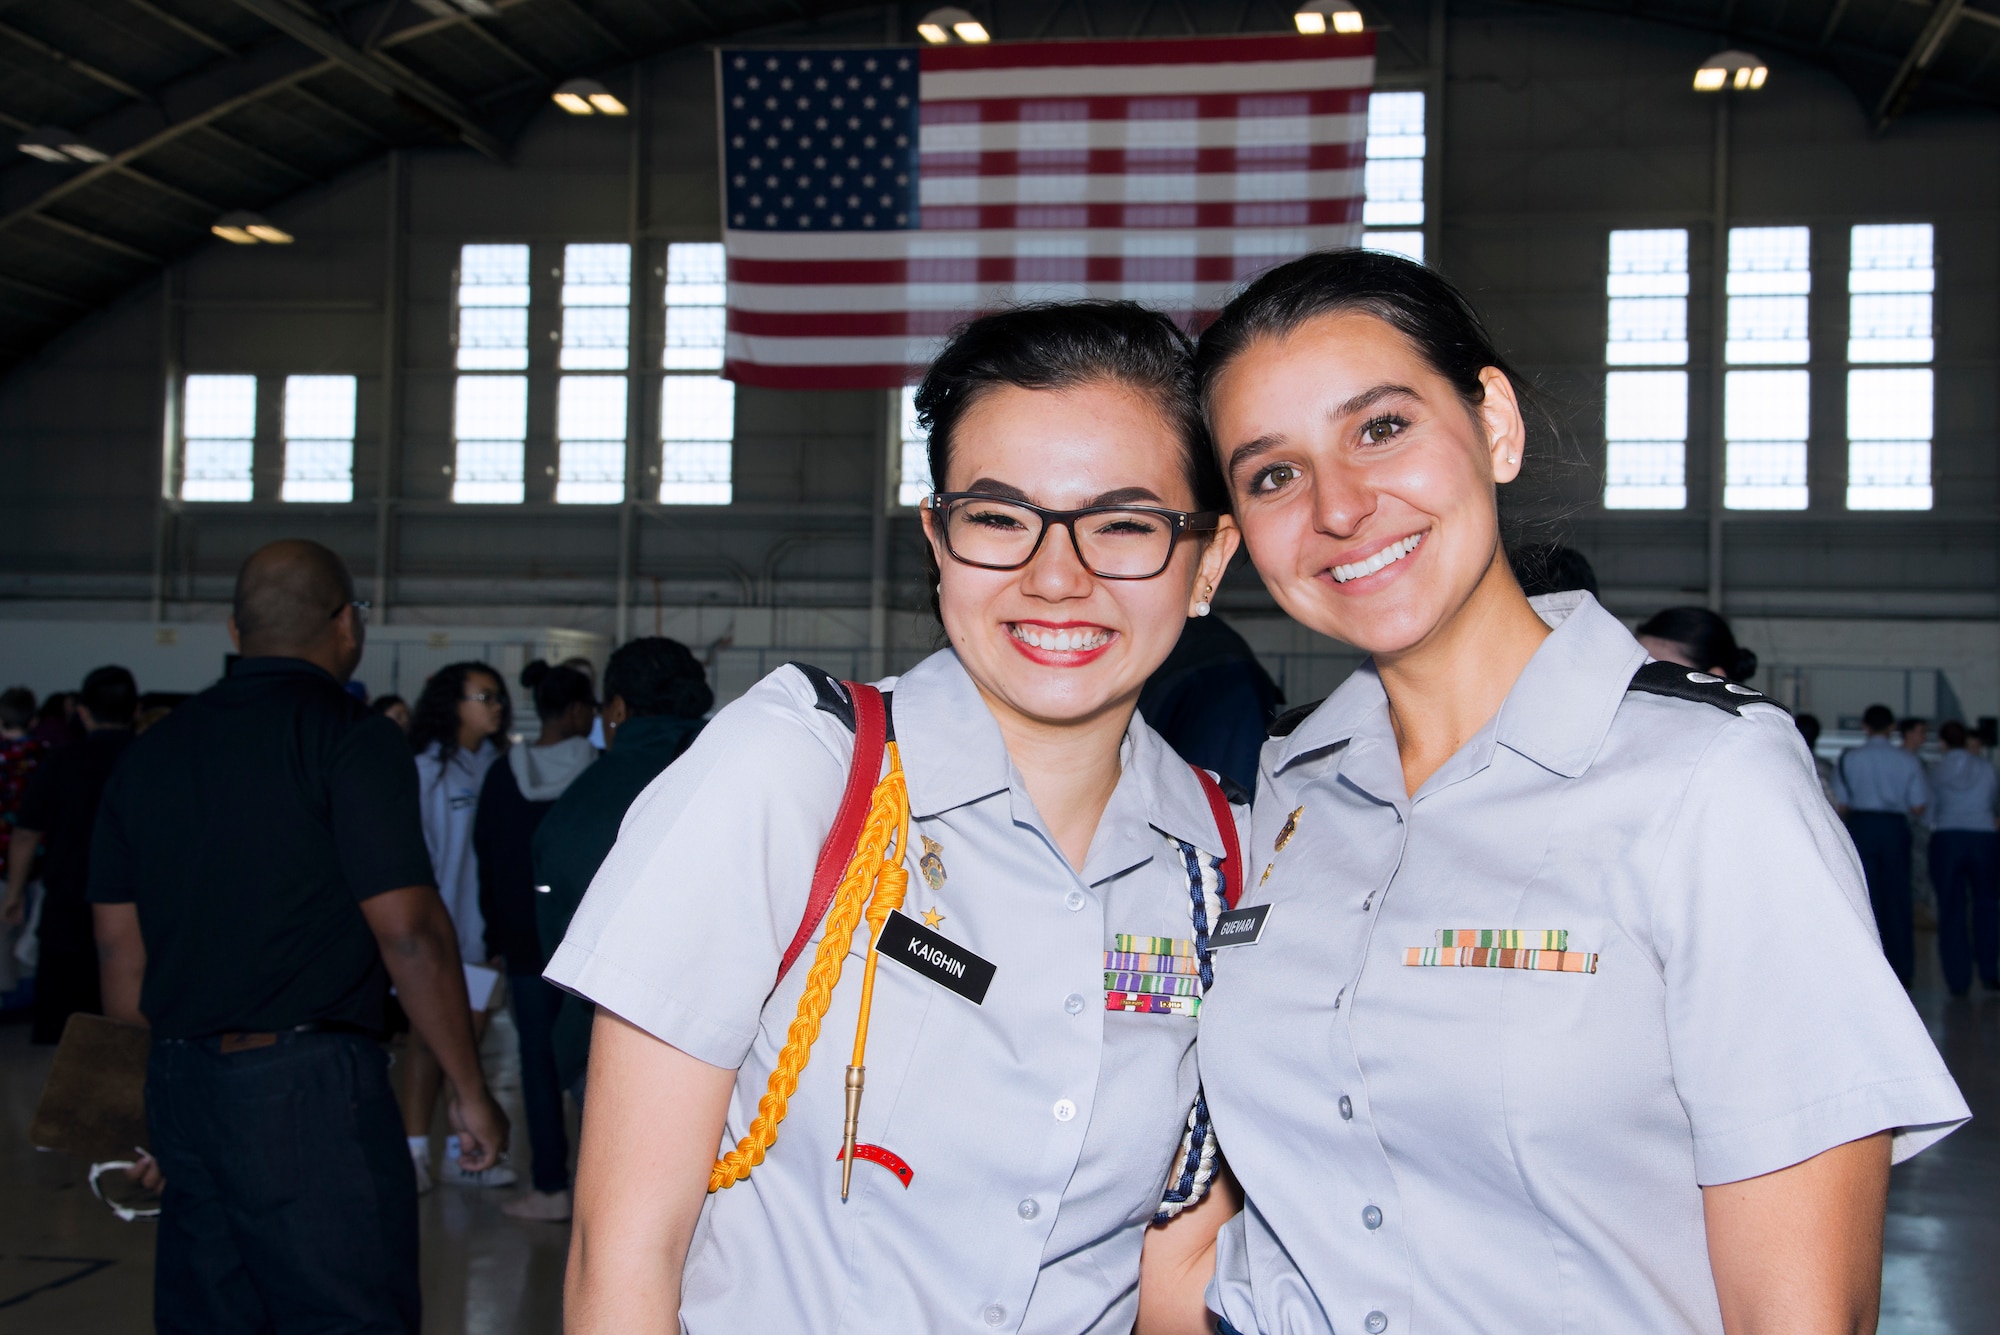 Junior Reserve Training Corps (JROTC) 1st Lt. Gwyneth Kaighin, and 1st Lt. Isabelle Guevara, both Florida JROTC cadets, pause for photo during the Science, Technology, Engineering, Arts and Math (STEAM) Day at MacDill Air Force Base, Fla., March 21, 2018.